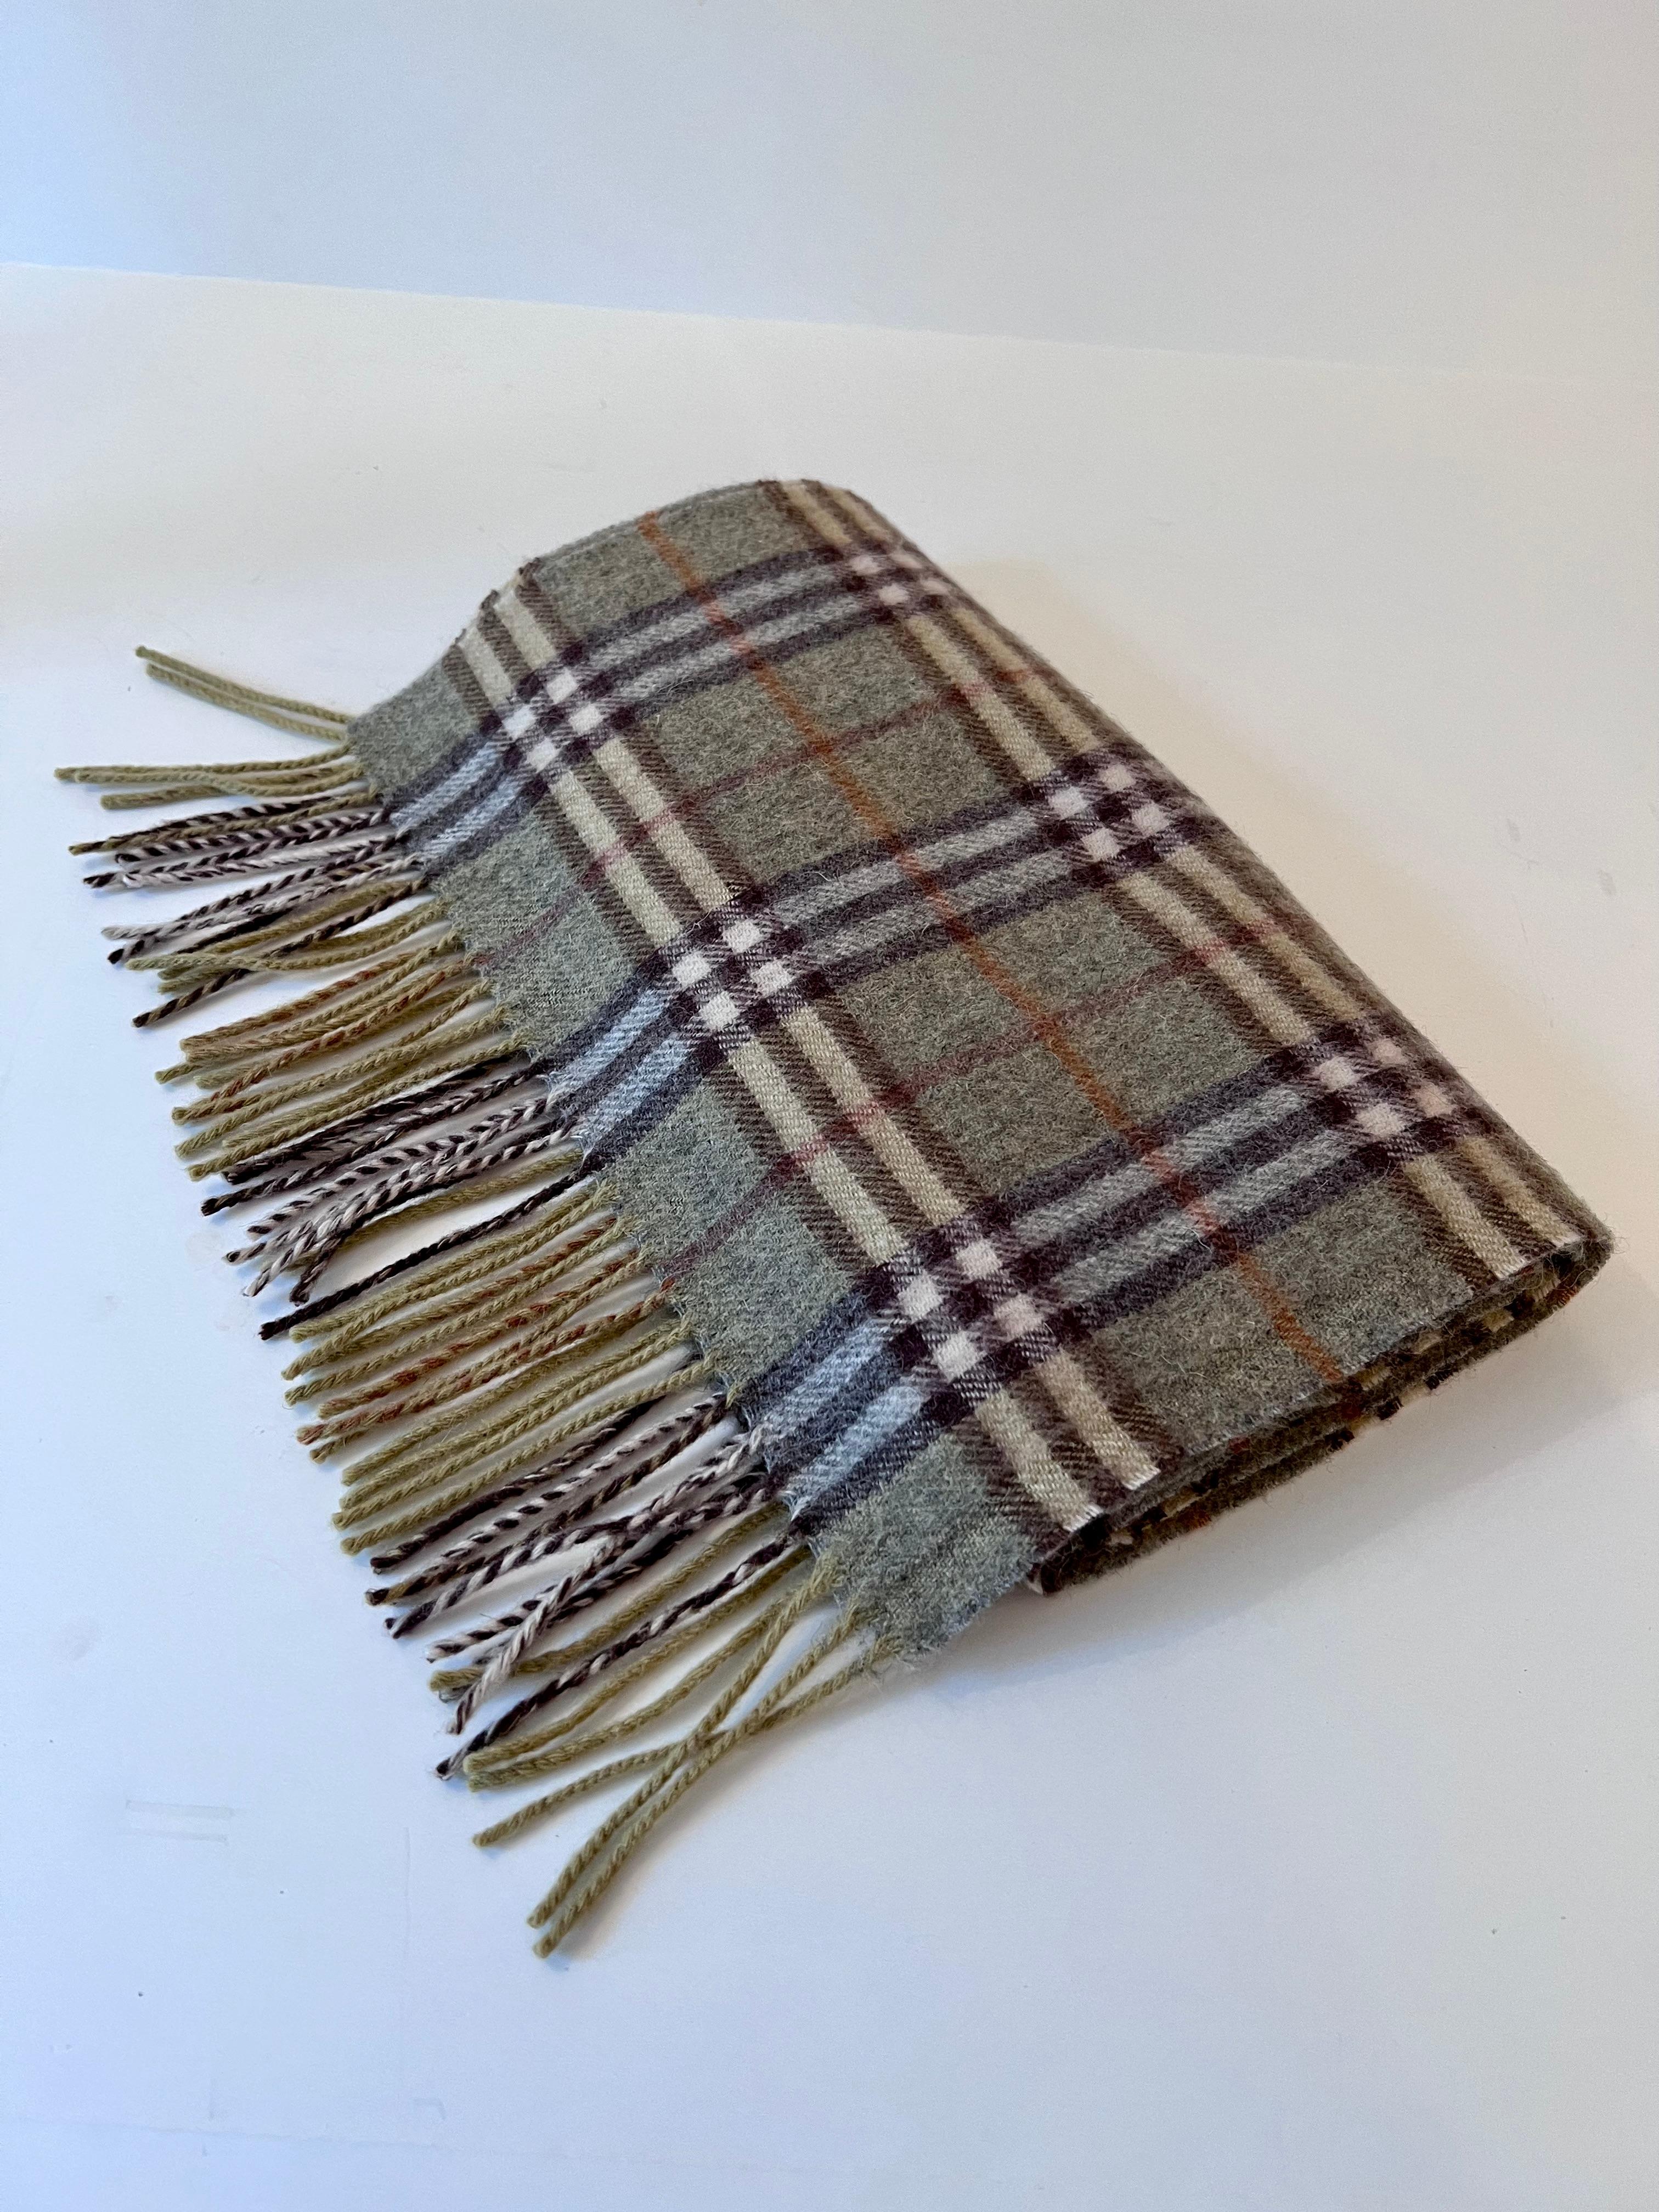 Original Burberry London Scarf of 100% Cashmere. Bluish Gray and versions thereof with fringe, Burberry label stitched on and in tact.. Has been previously owned but in excellent condition.